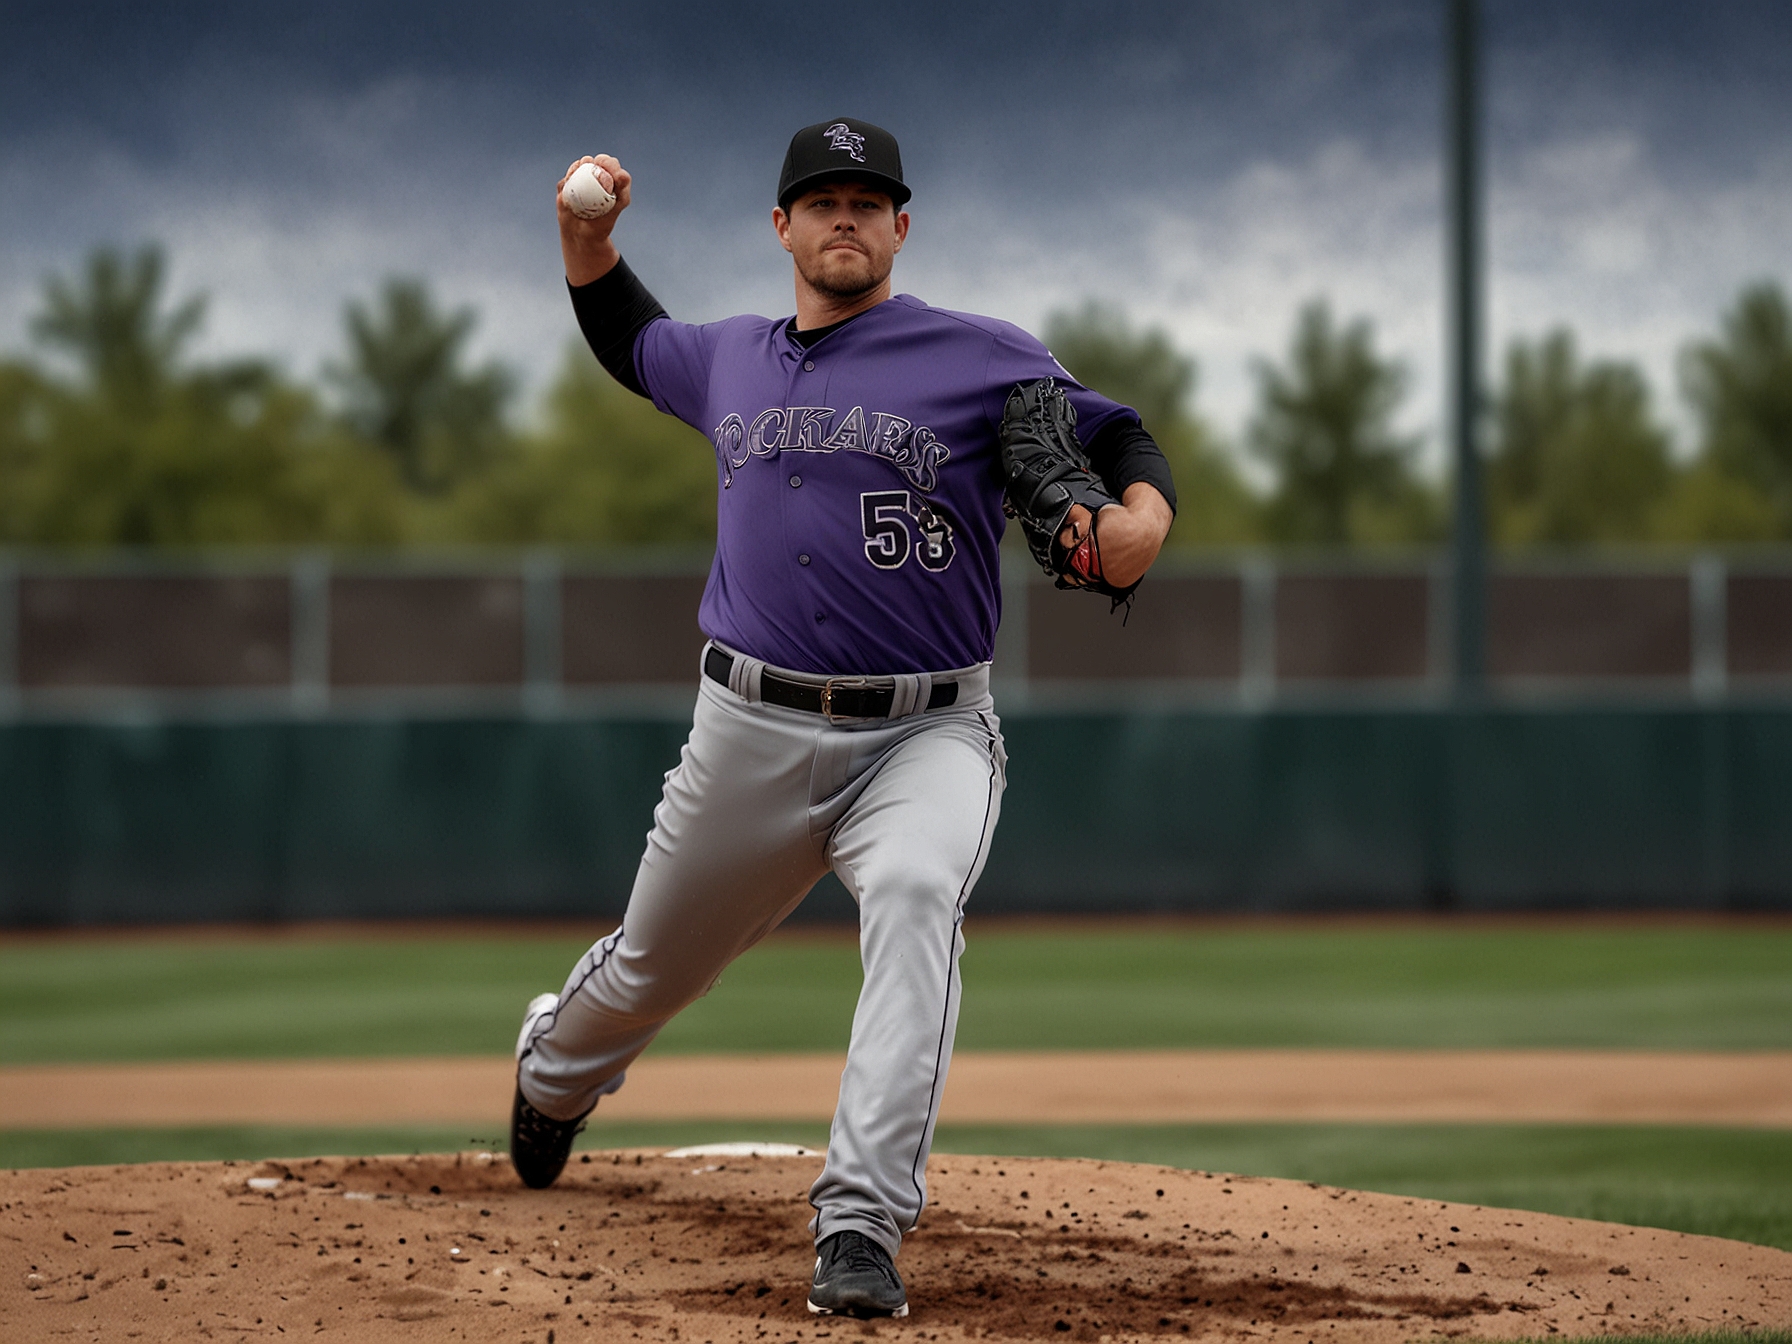 A focused Colorado Rockies pitcher throws a powerful fastball during a bullpen session, showcasing the improved mechanics and renewed determination he's developed while recovering from early-season struggles.